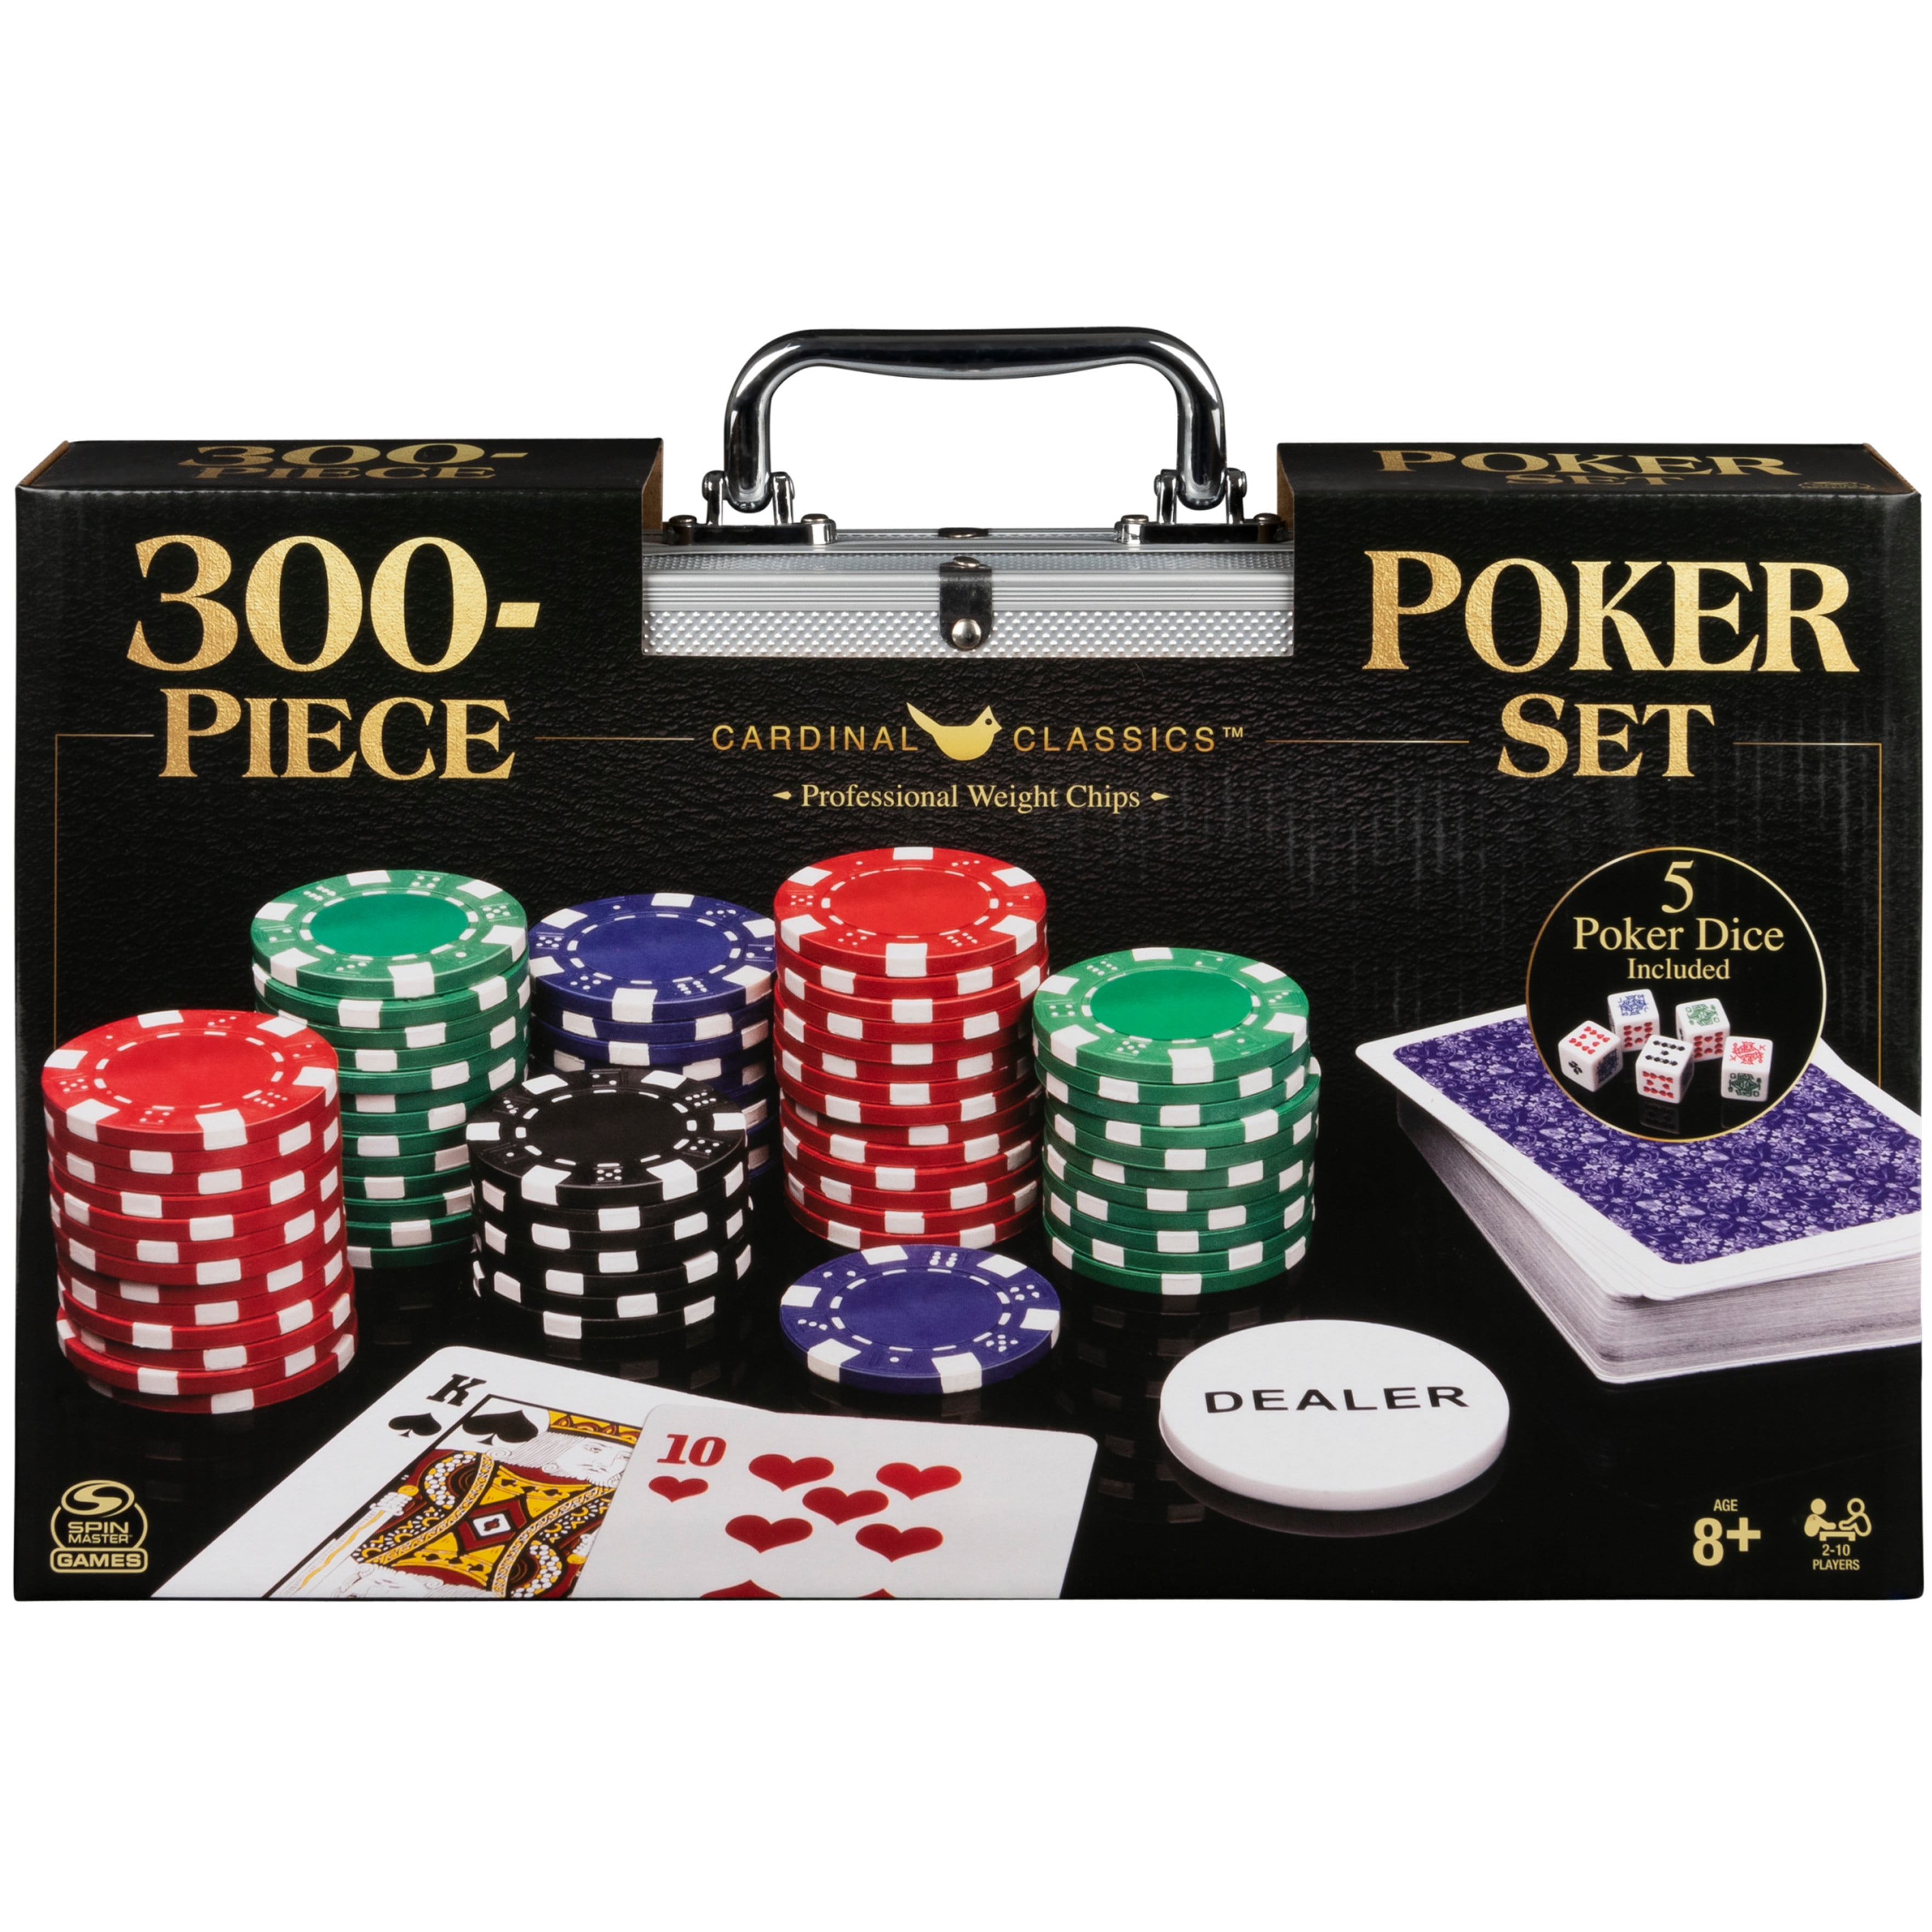 Cardinal Games 300 Piece Poker Set with 11.5g Proffesional Weight Poker Chips 